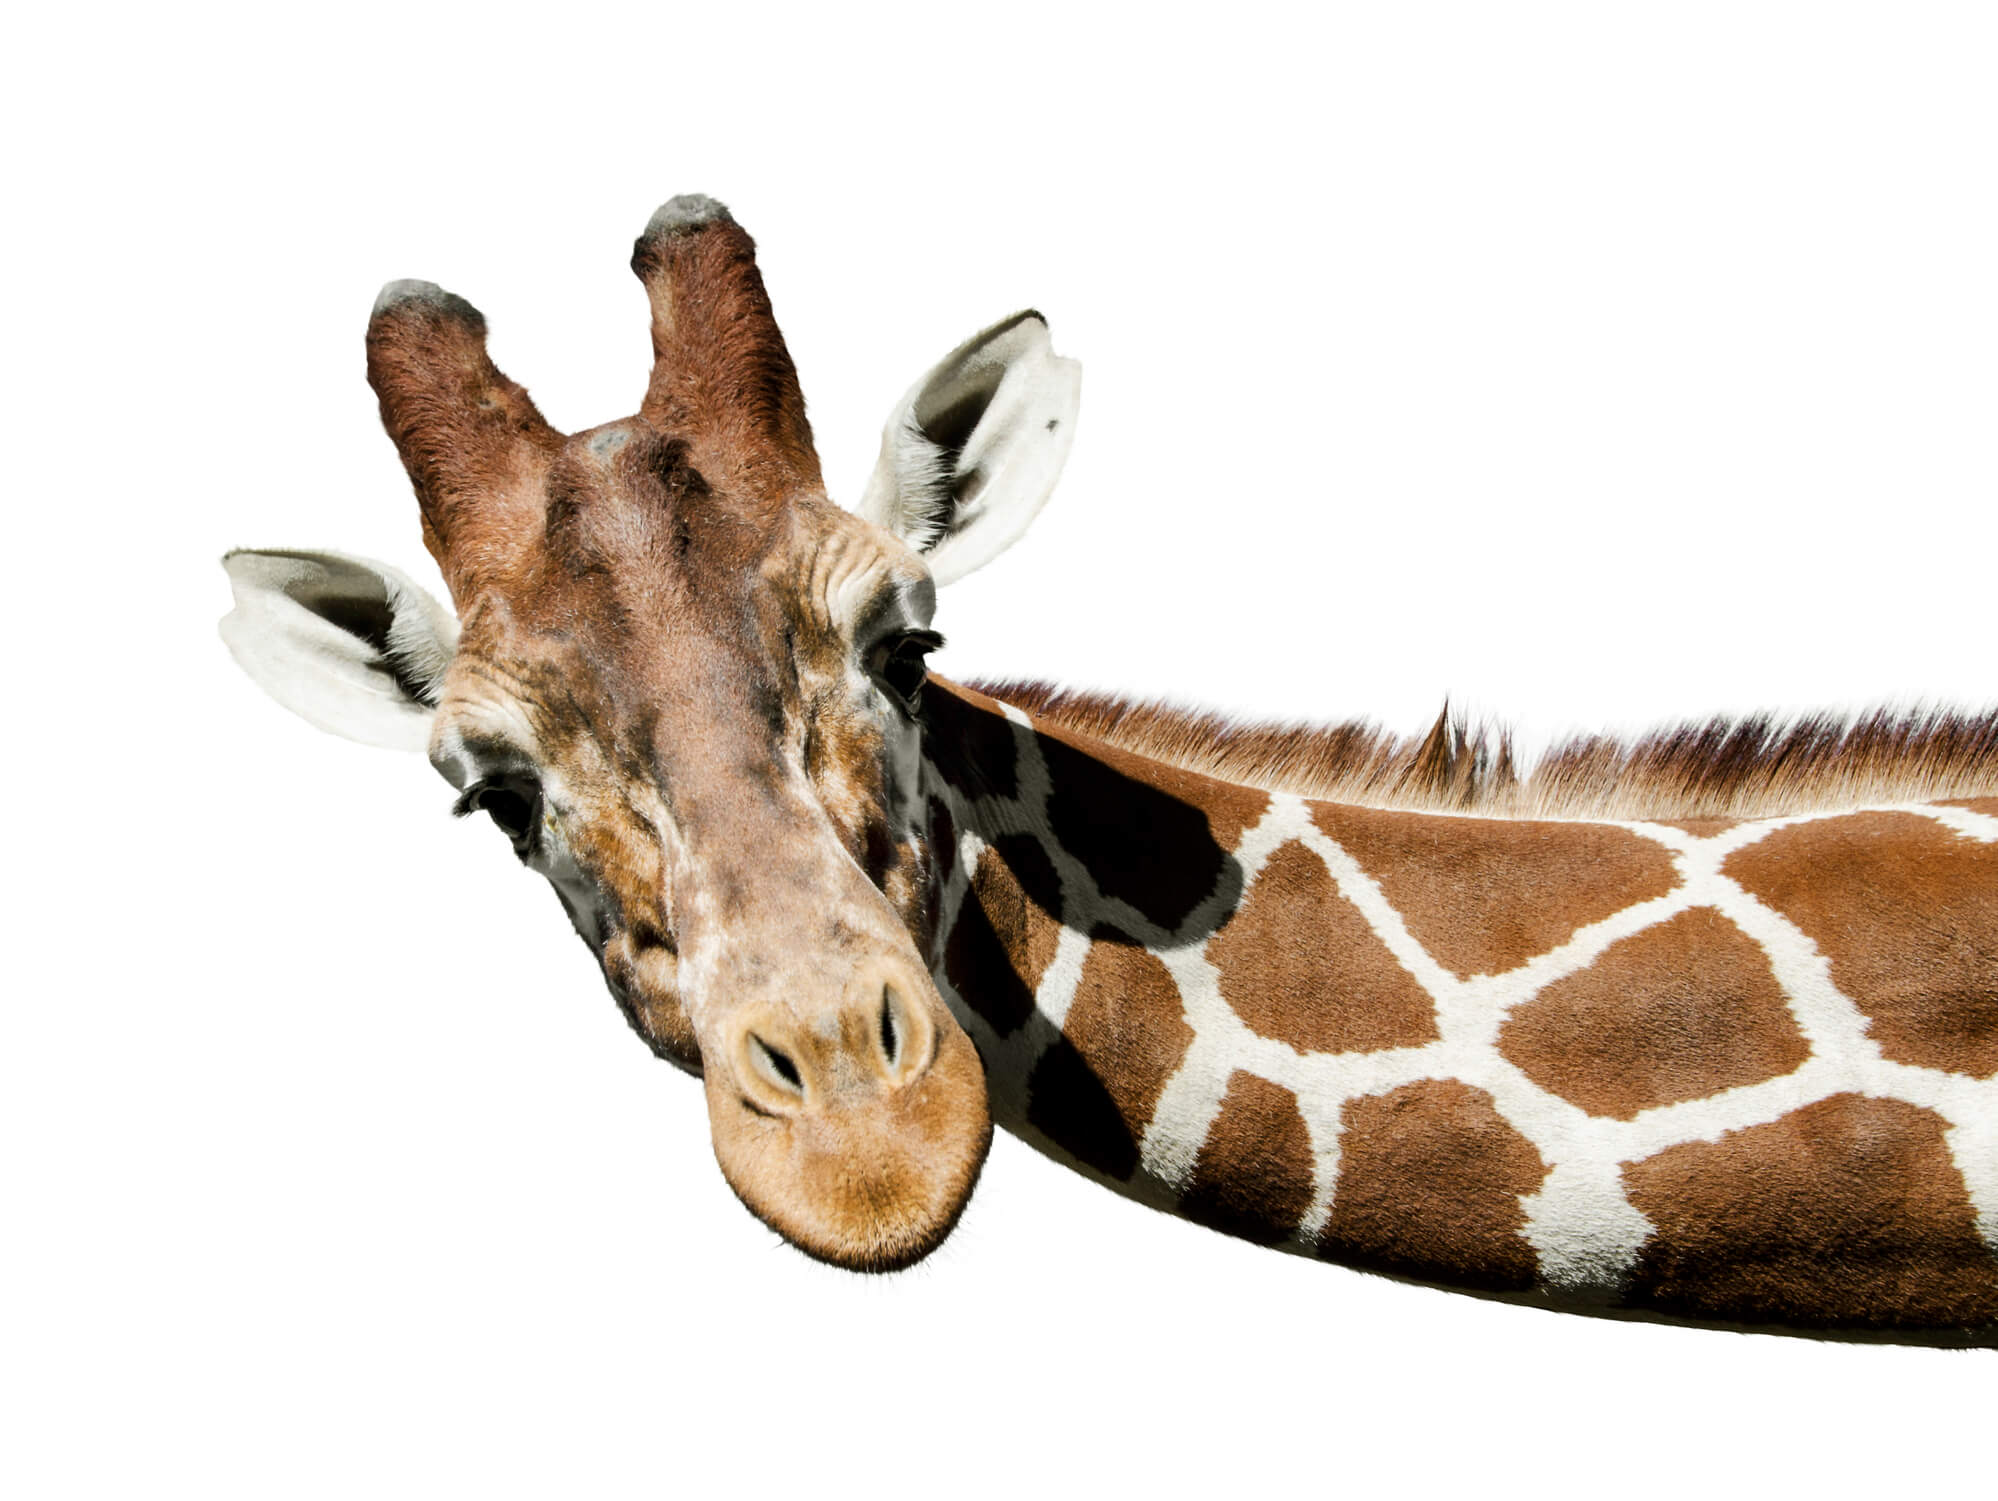 What We Can Learn from a Giraffe’s Neck